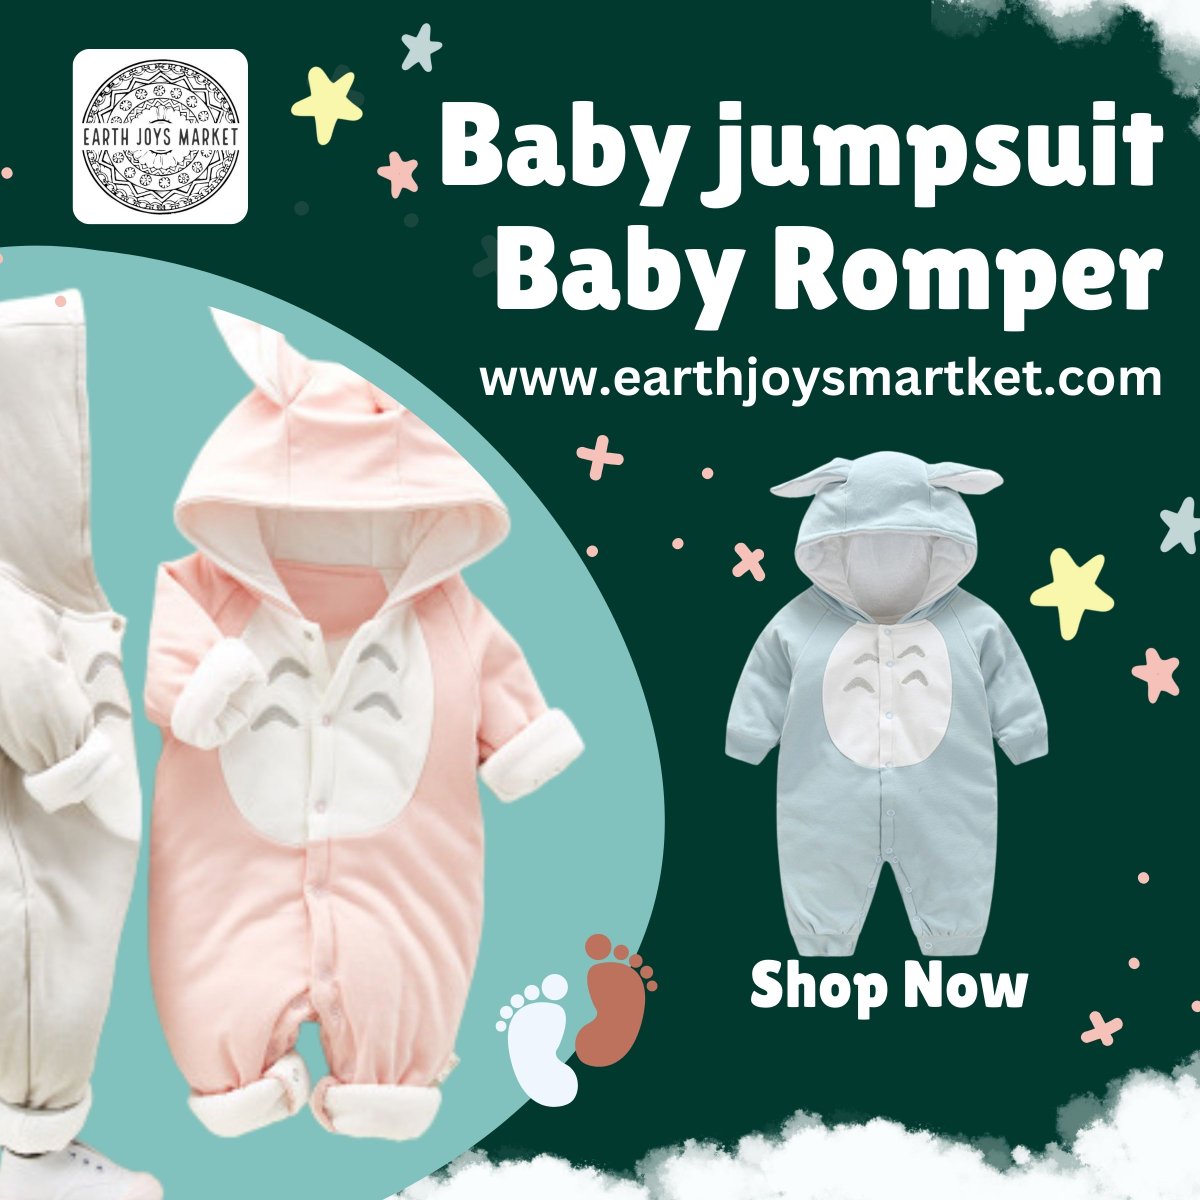 'Earth Joys Market: Snuggle Up Your Baby in Style with our Baby Jumpsuit Romper Collection!'
Shop Now: ➡ earthjoysmarket.com/product/baby-j…

#BabyReindeer #babycare #babyproducts #earthjoysmarket #onlineshop #shoppingonline